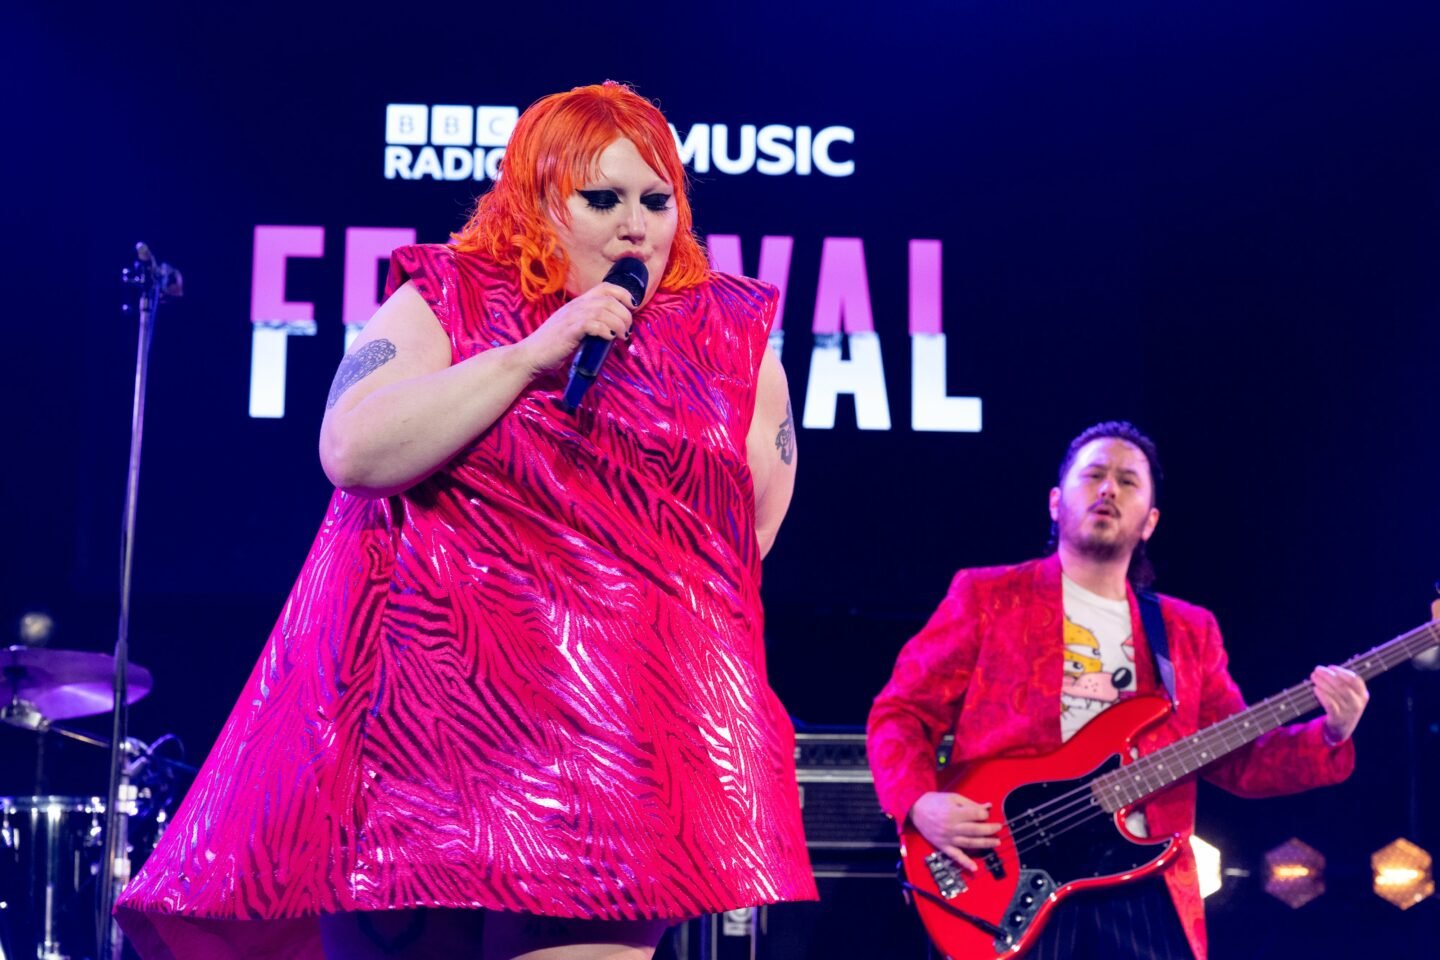 Beth Ditto performs in a hot pink dress onstage at BBC 6 festival with her band Gossip